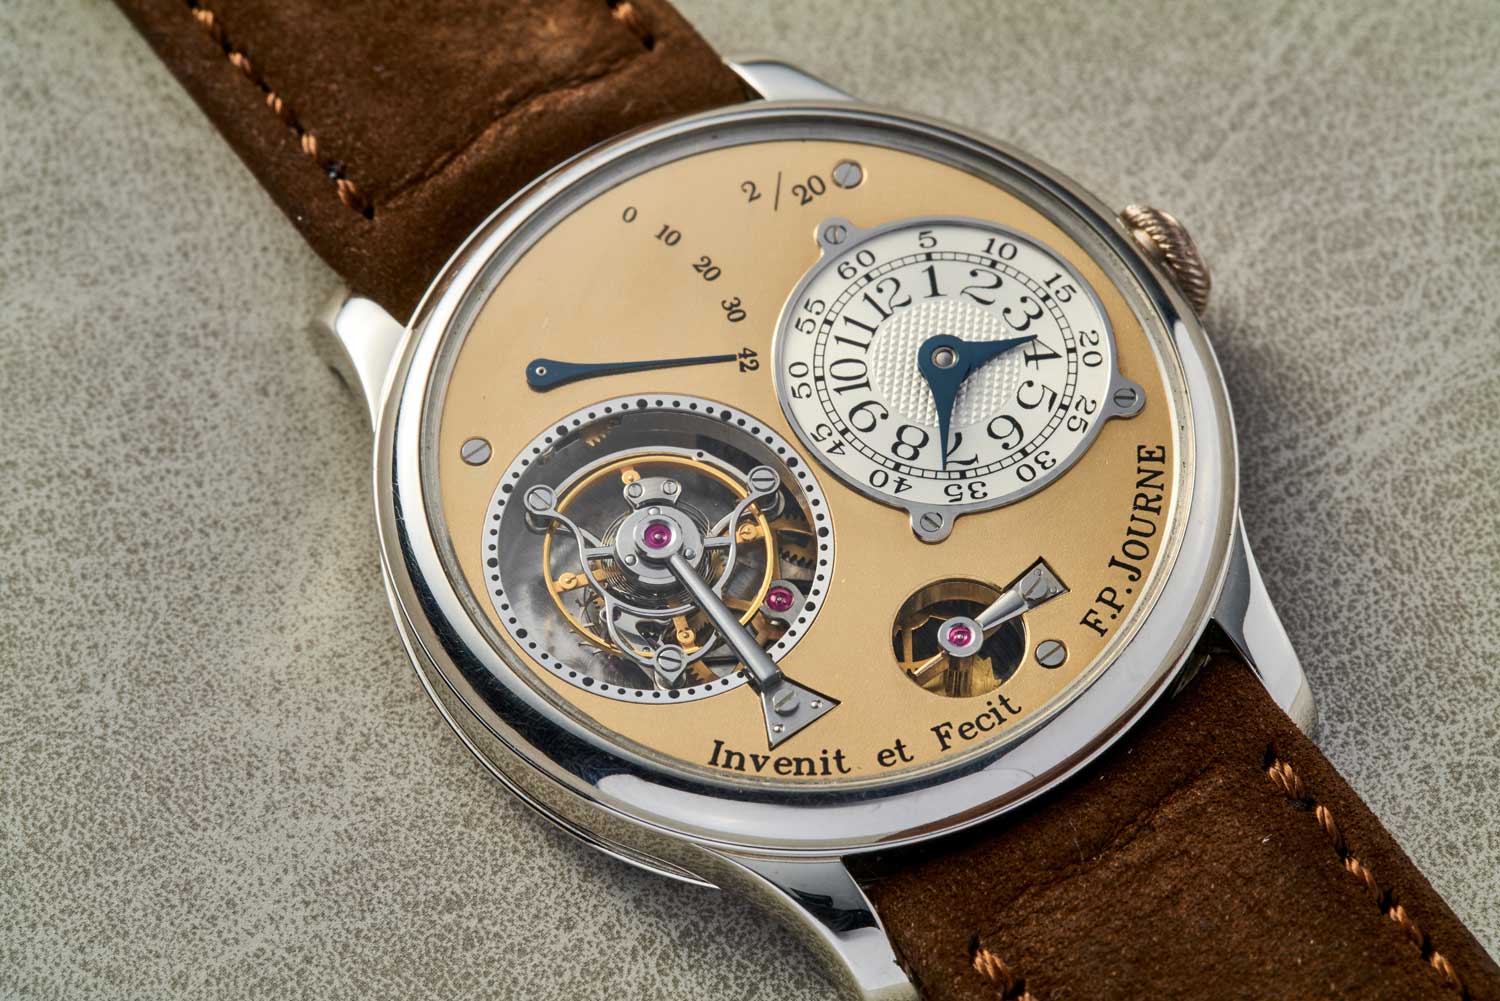 Lot 2039 is a Tourbillon Souverain “Souscription,” No. 2/20, otherwise known as the first series with this example being the second Tourbillon Souverain produced. The Souscription series represents the only Tourbillon Souverain watches that were numbered both on their dials and the case back. The dial has been hand-finished and is further distinguished by having a rounded, black polished remontoir cock which would later be replaced by a flat one in the third series.